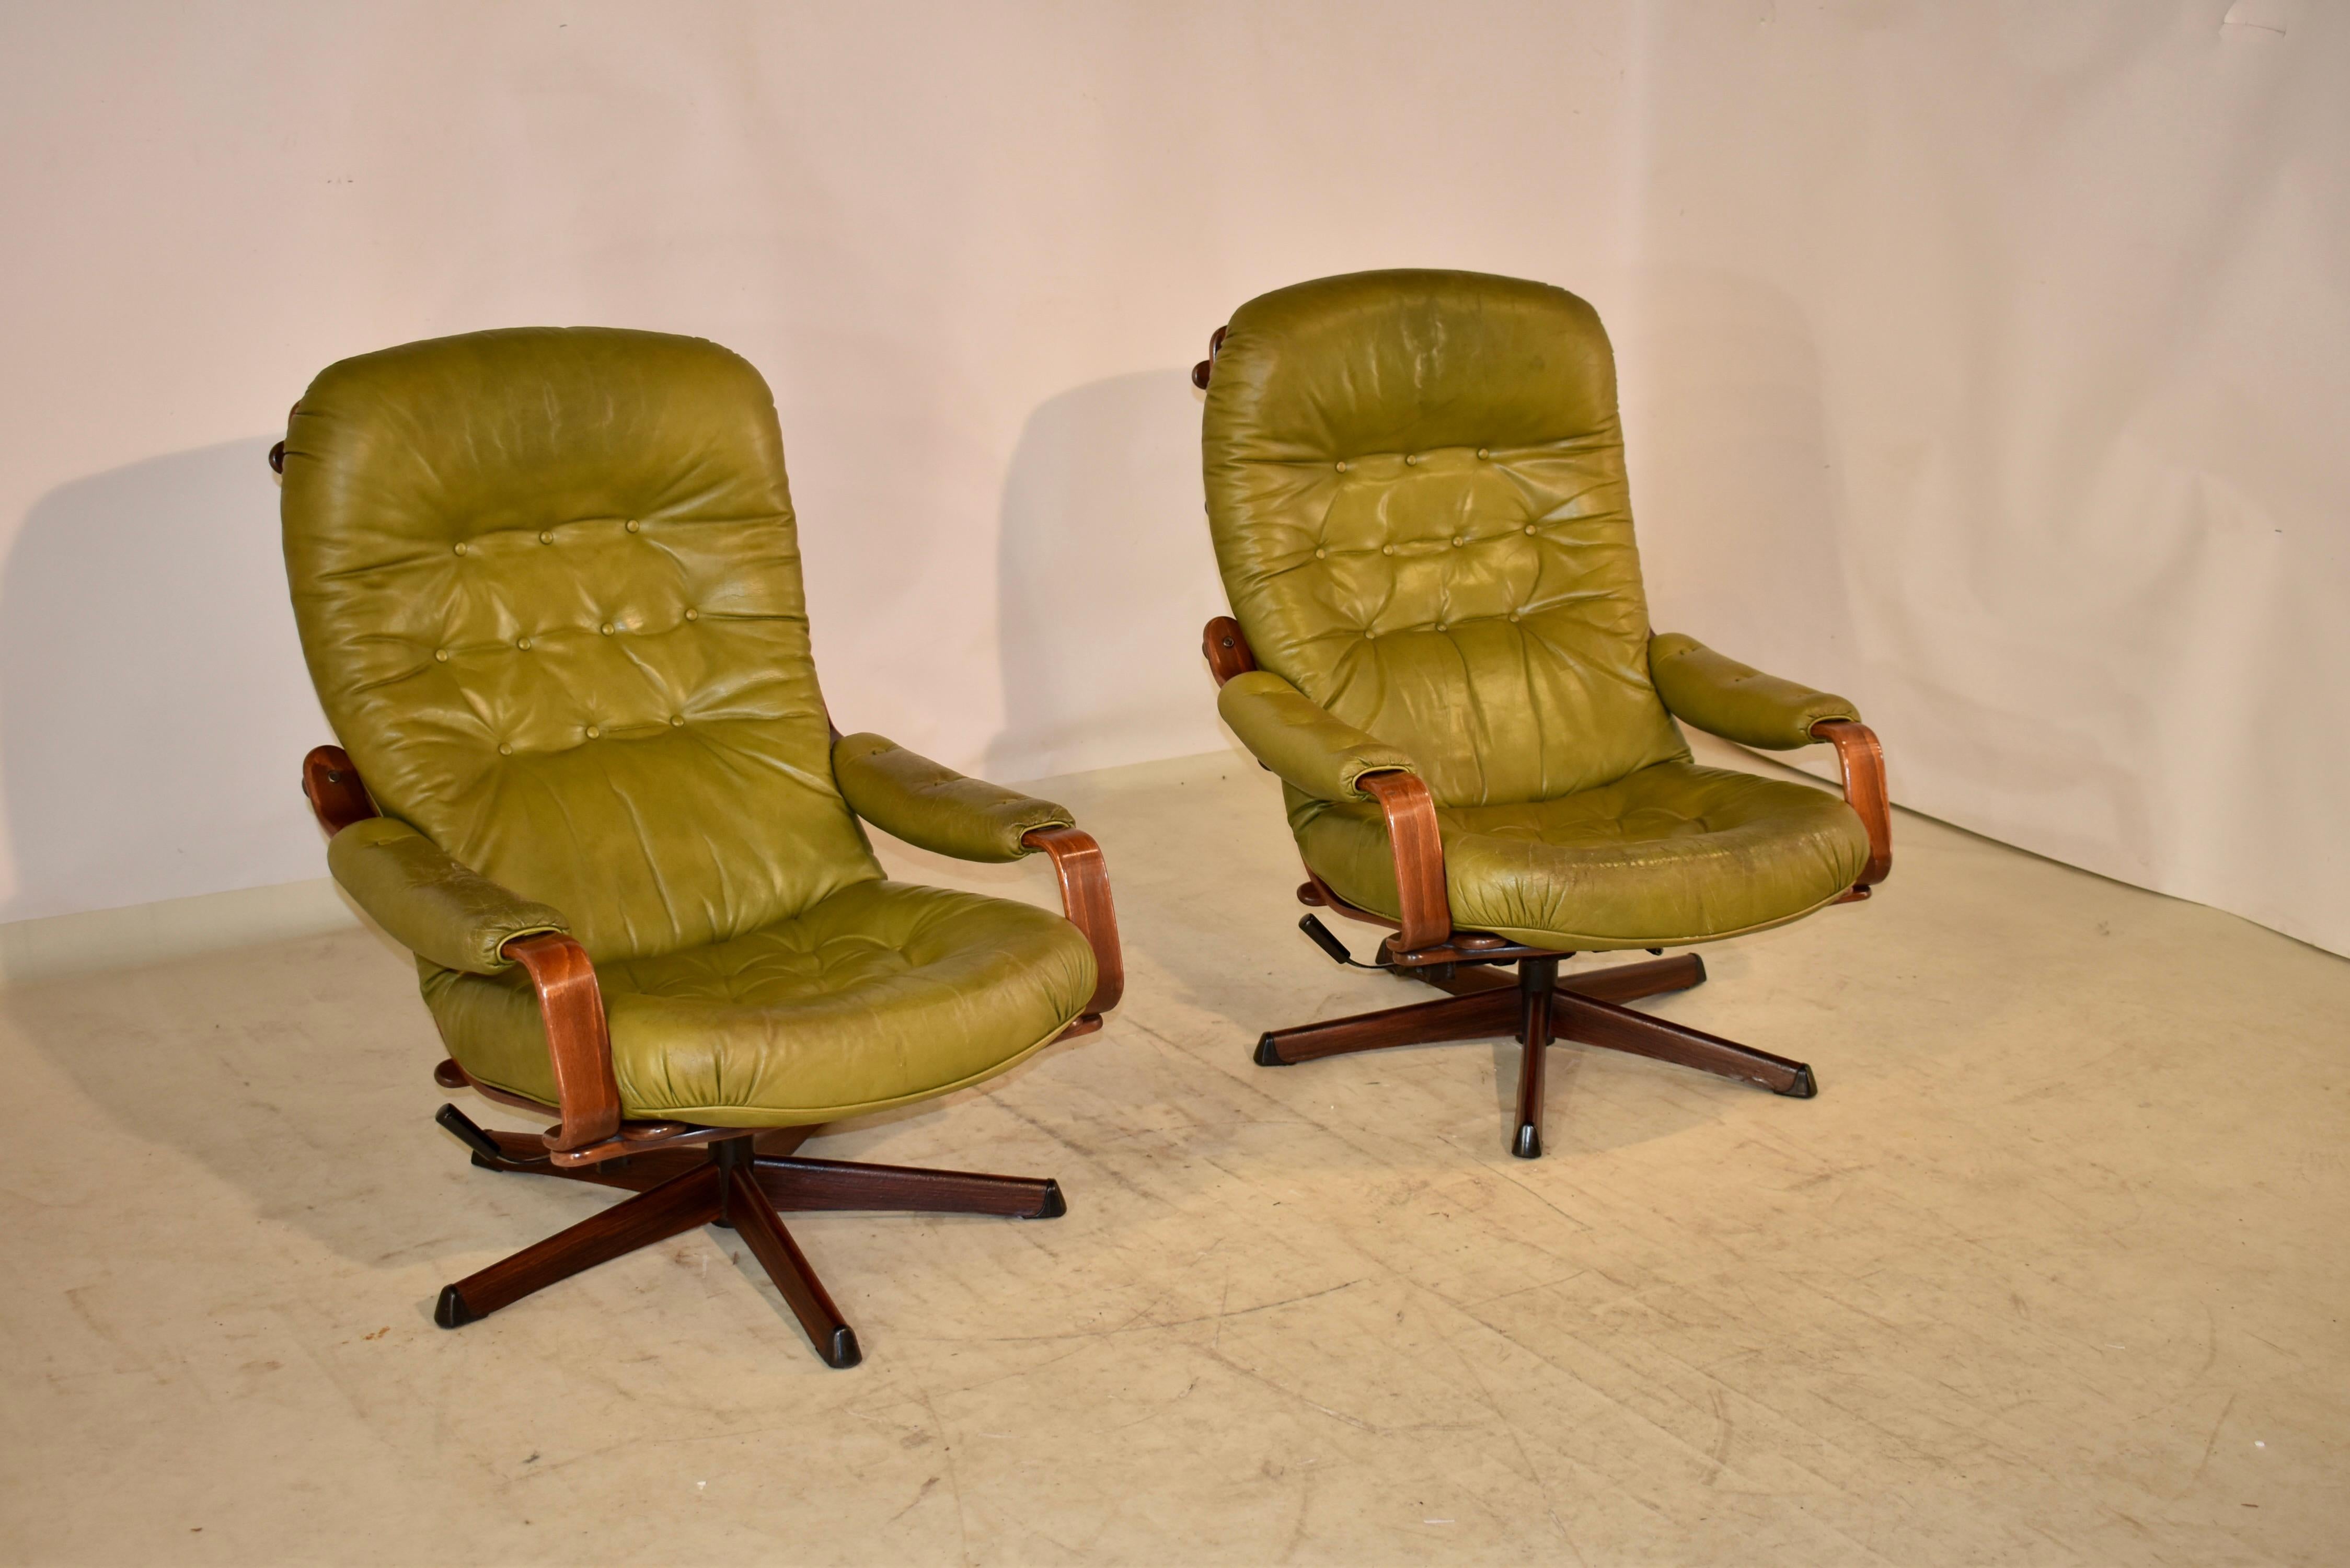 A lovely pair of Swedish midcentury lounge chairs by Gote Mobler Nassjo, with labels underneath. These lounge chairs were built for style and comfort, each with an adjustable reclining mechanism and swiveling feature. In tufted green leather with